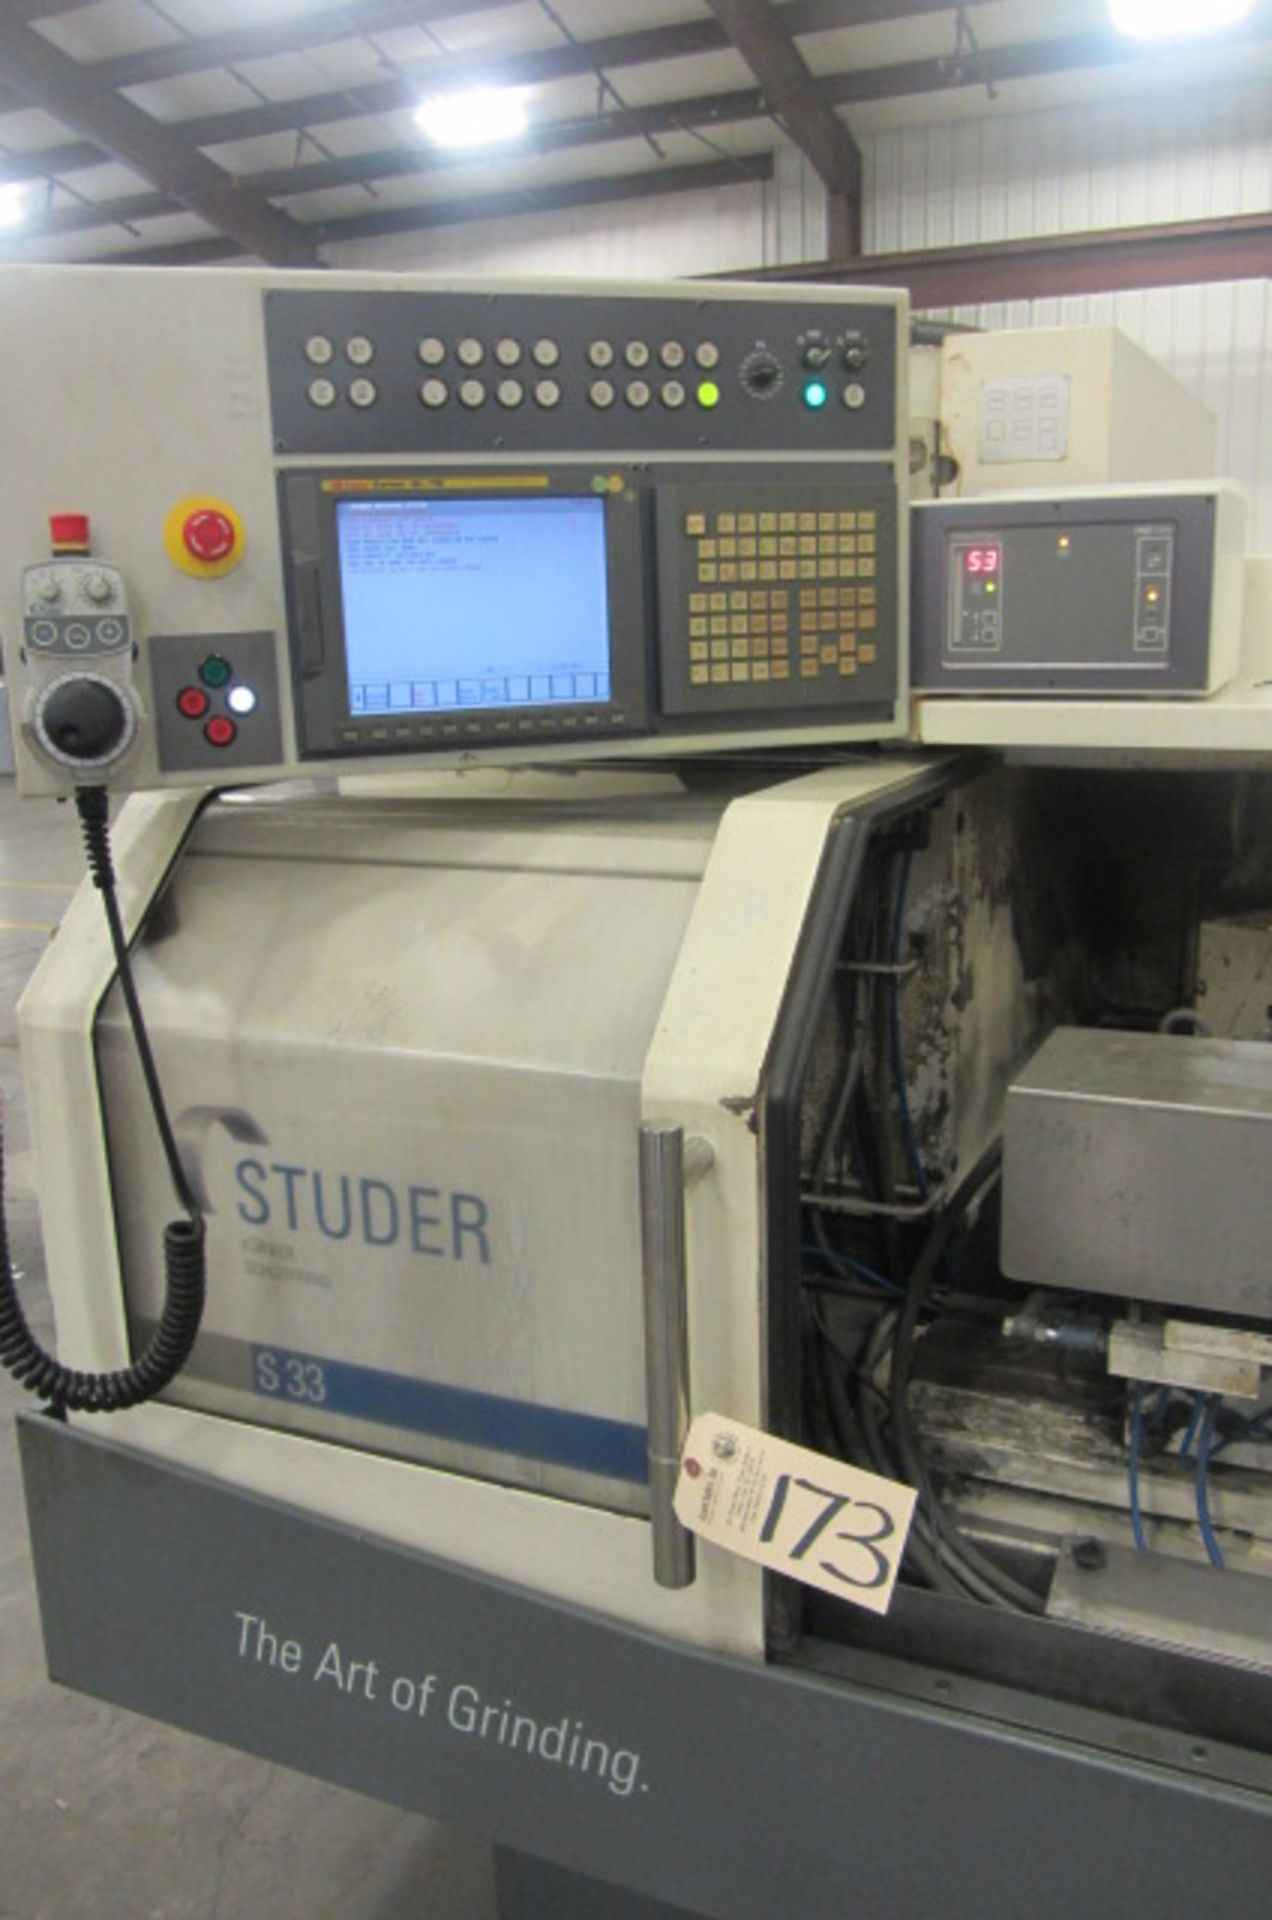 Studer Model S33 CNC Cylindrical Grinder with 14'' Swing x 32'' Centers, Angle Head, Probe, Paper - Image 2 of 7